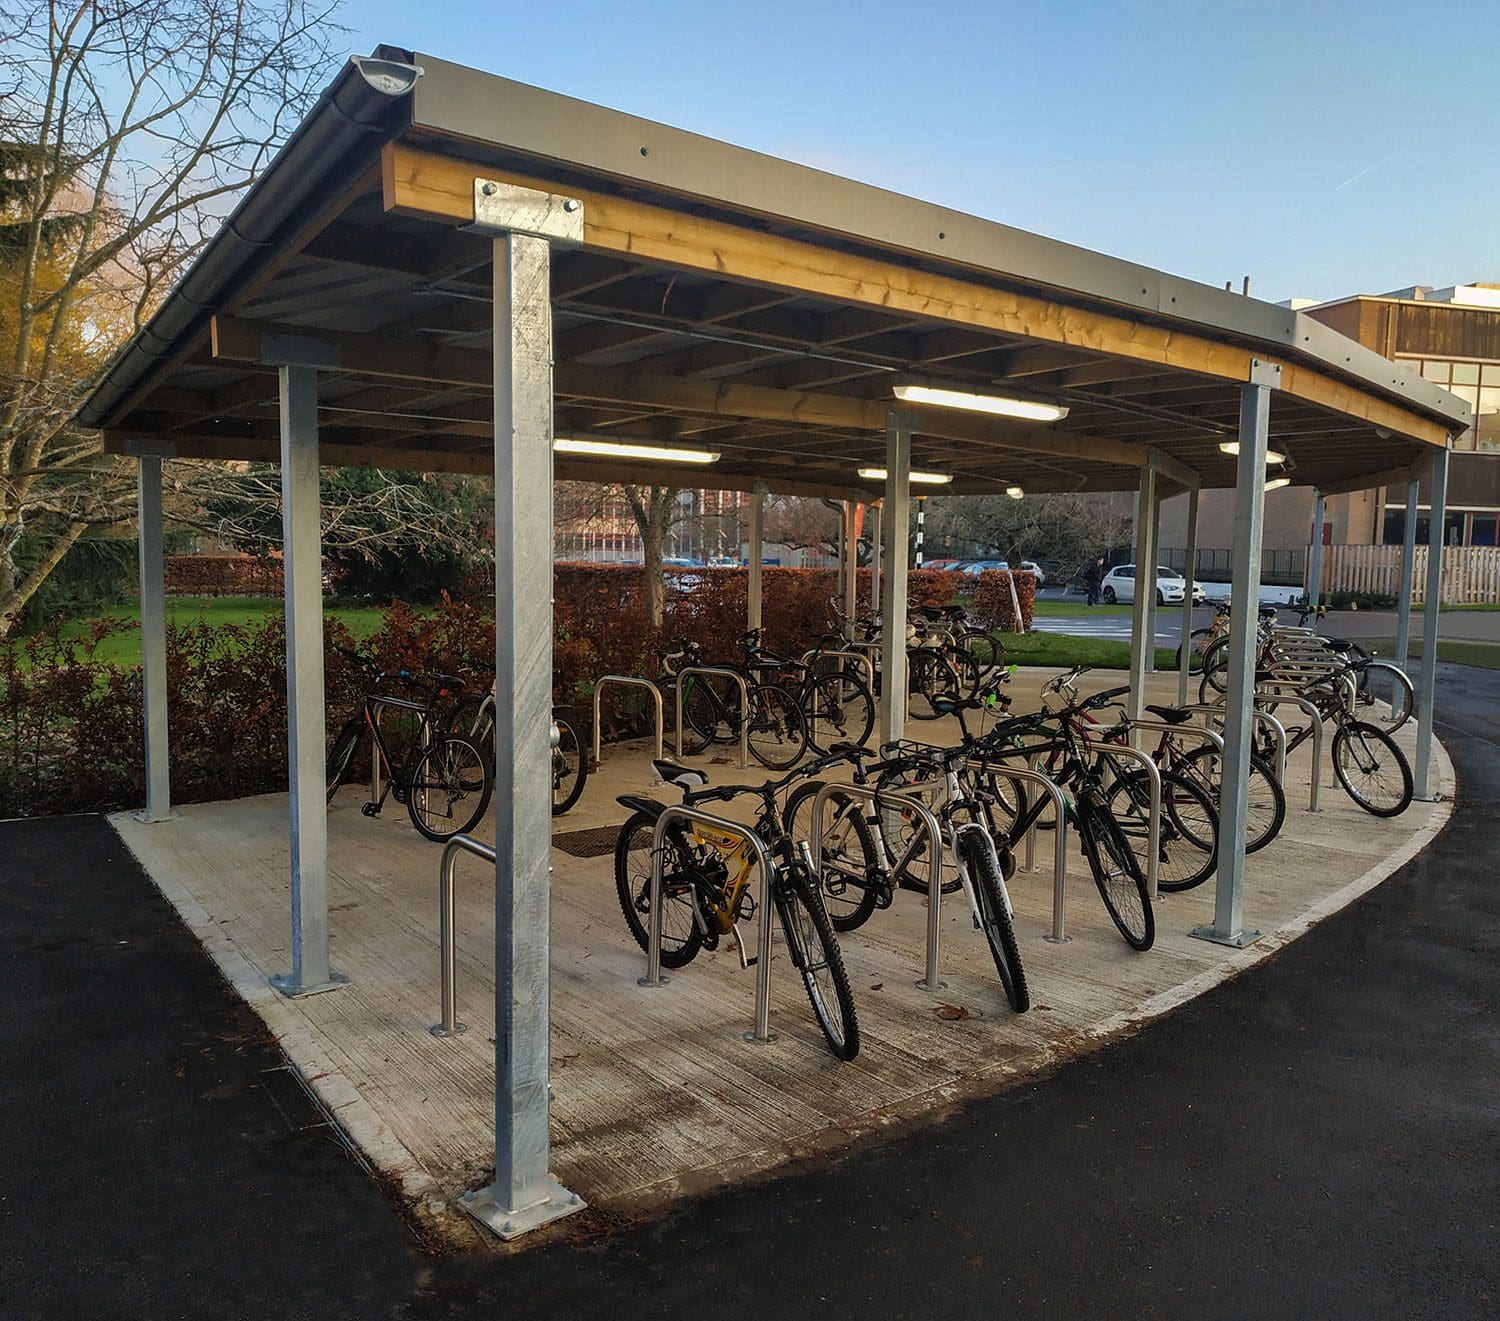 Rows of metal bike secure hoops under curved wooden and metal canopy